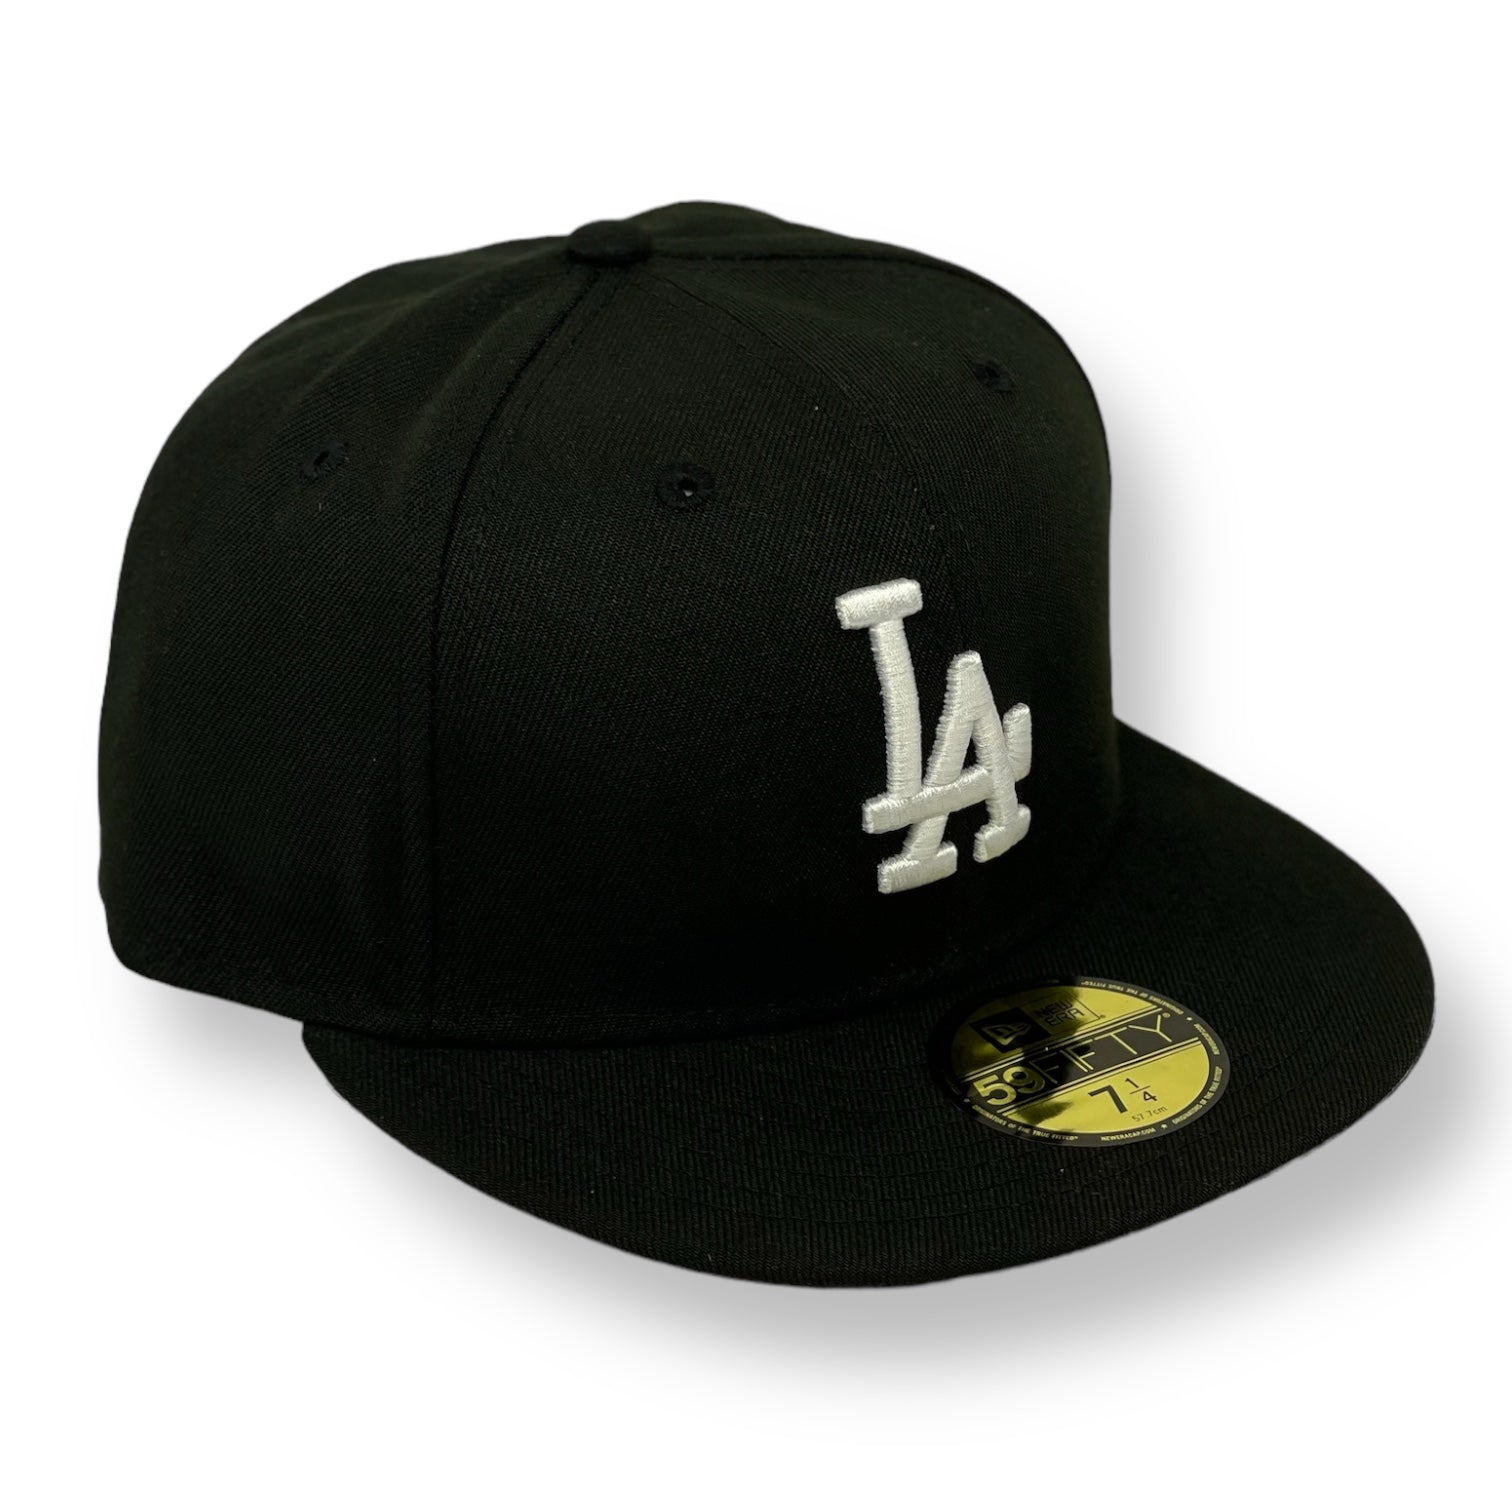 LOS ANGELES DODGERS (BLACK) NEWERA 59FIFTY FITTED